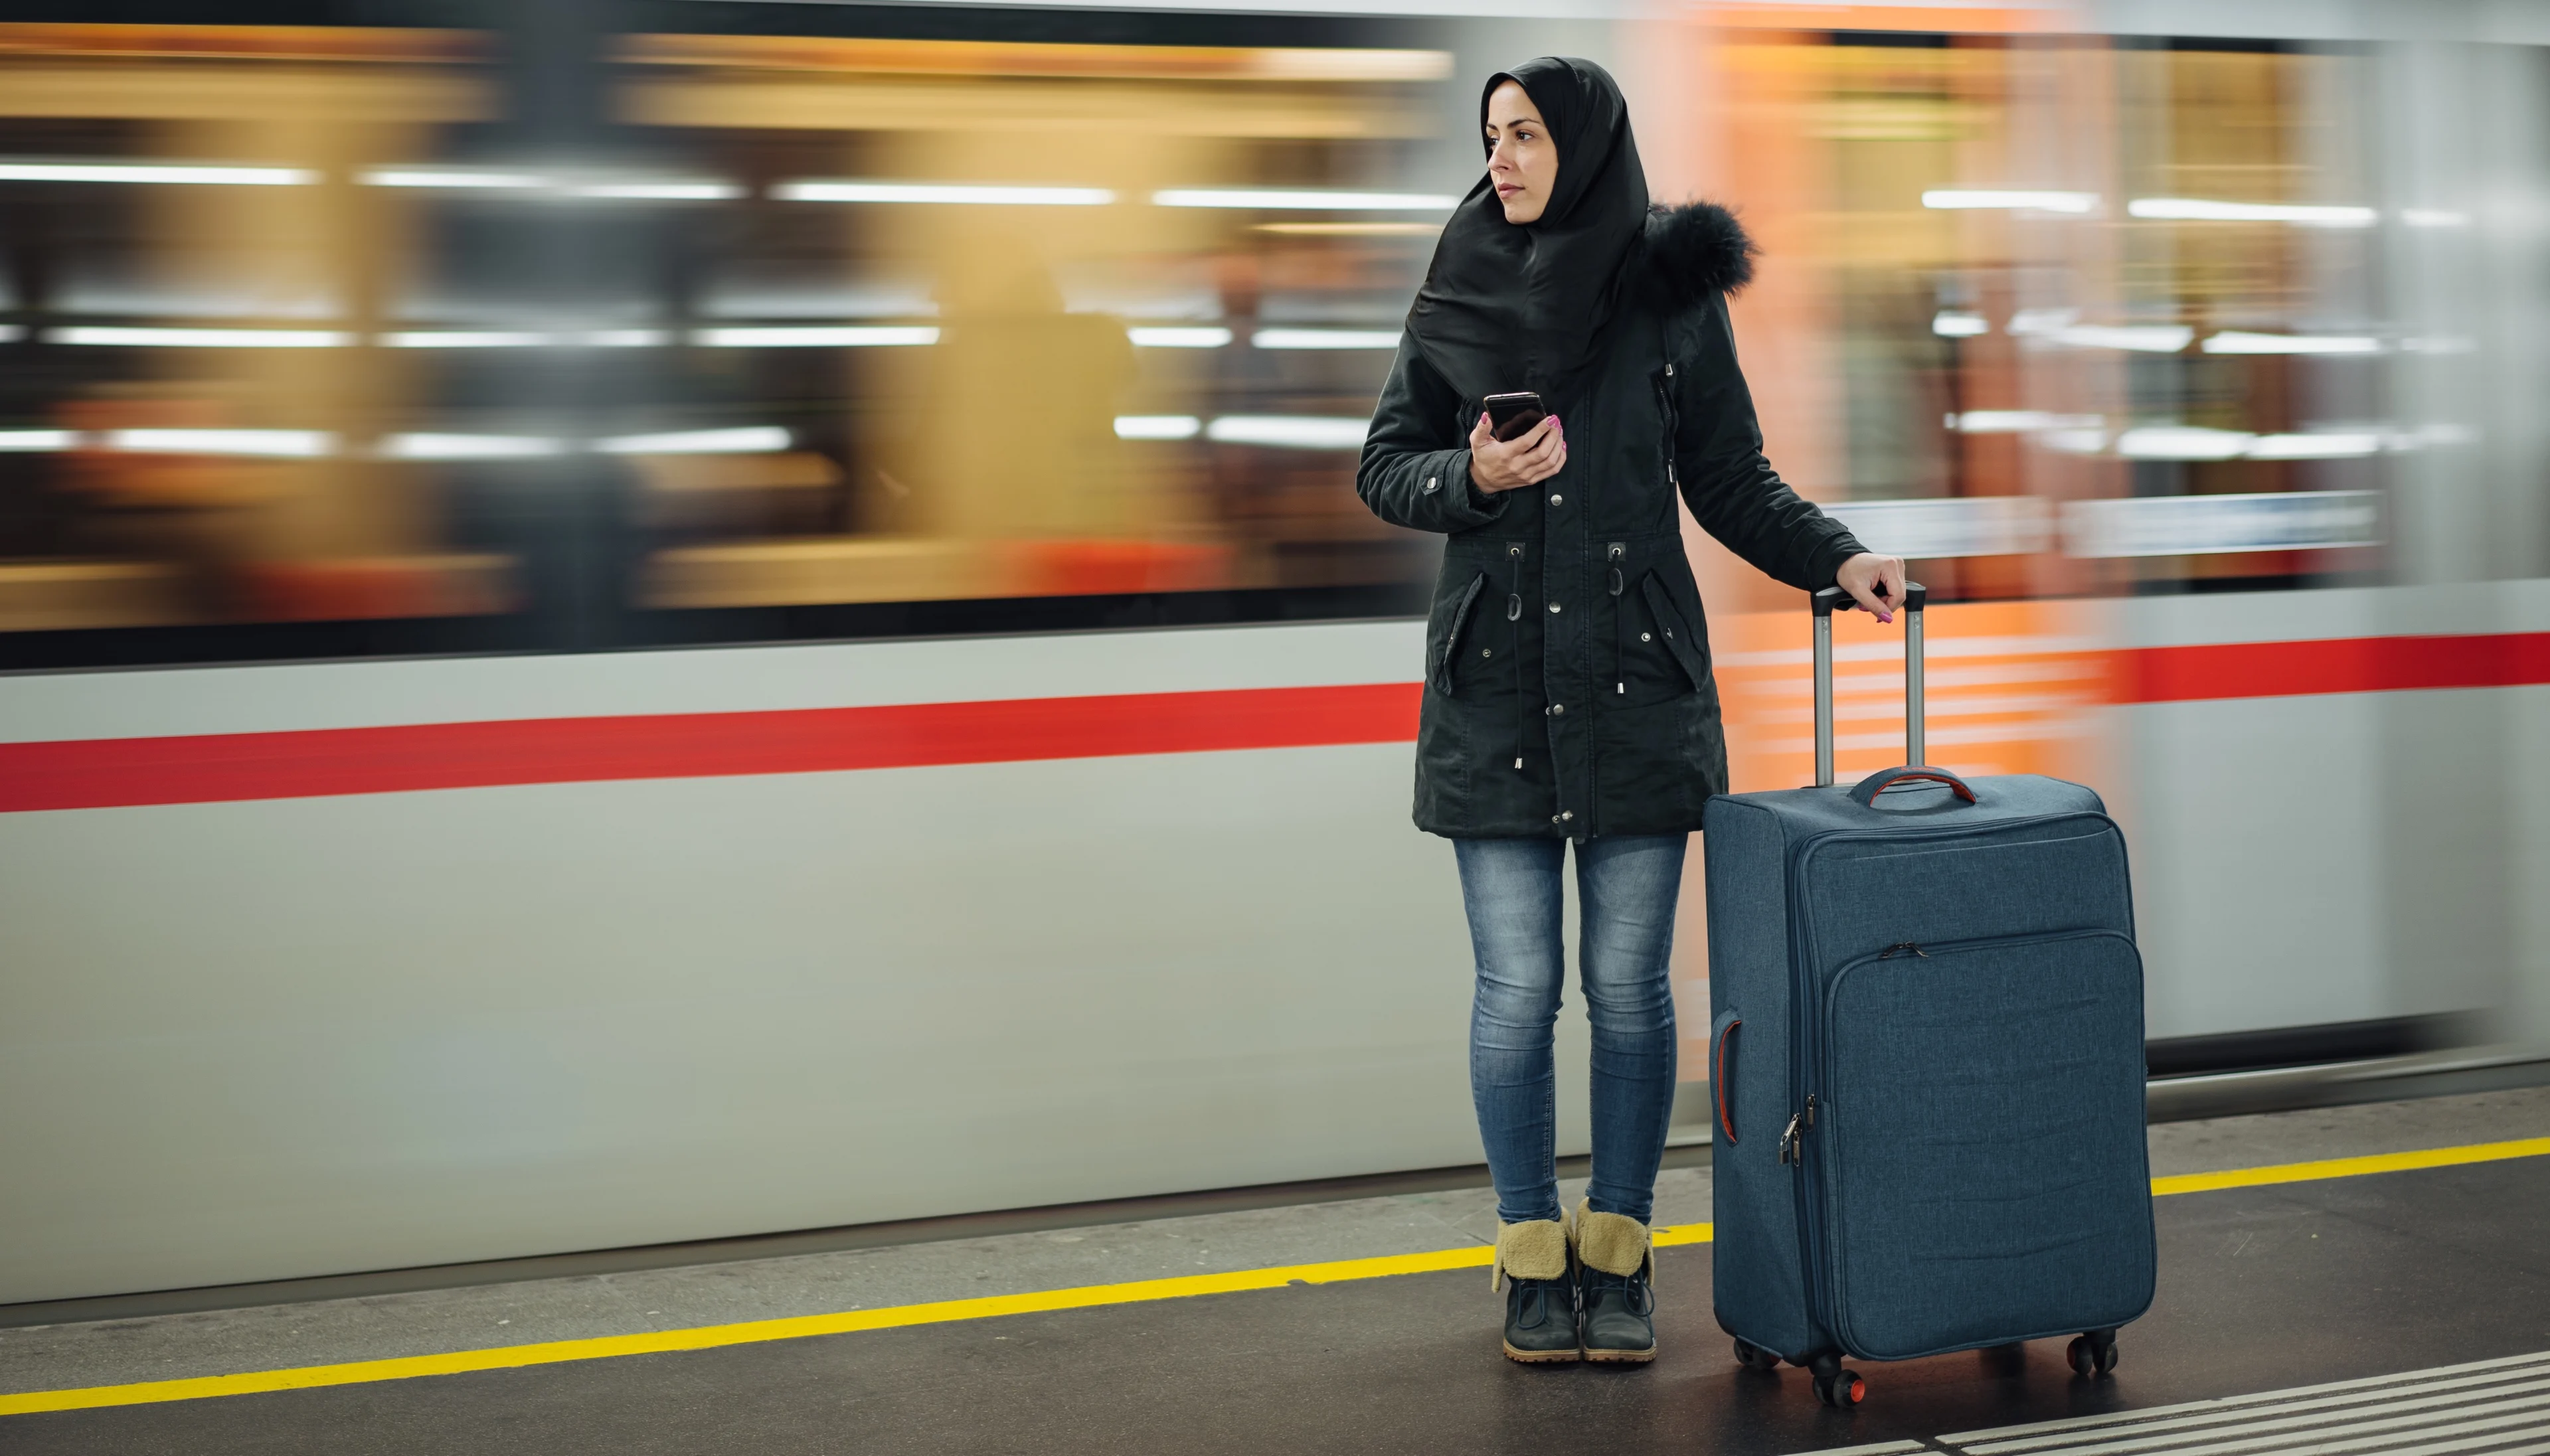 A Muslim woman with a large suitcase on a train platform as a train goes by in the background